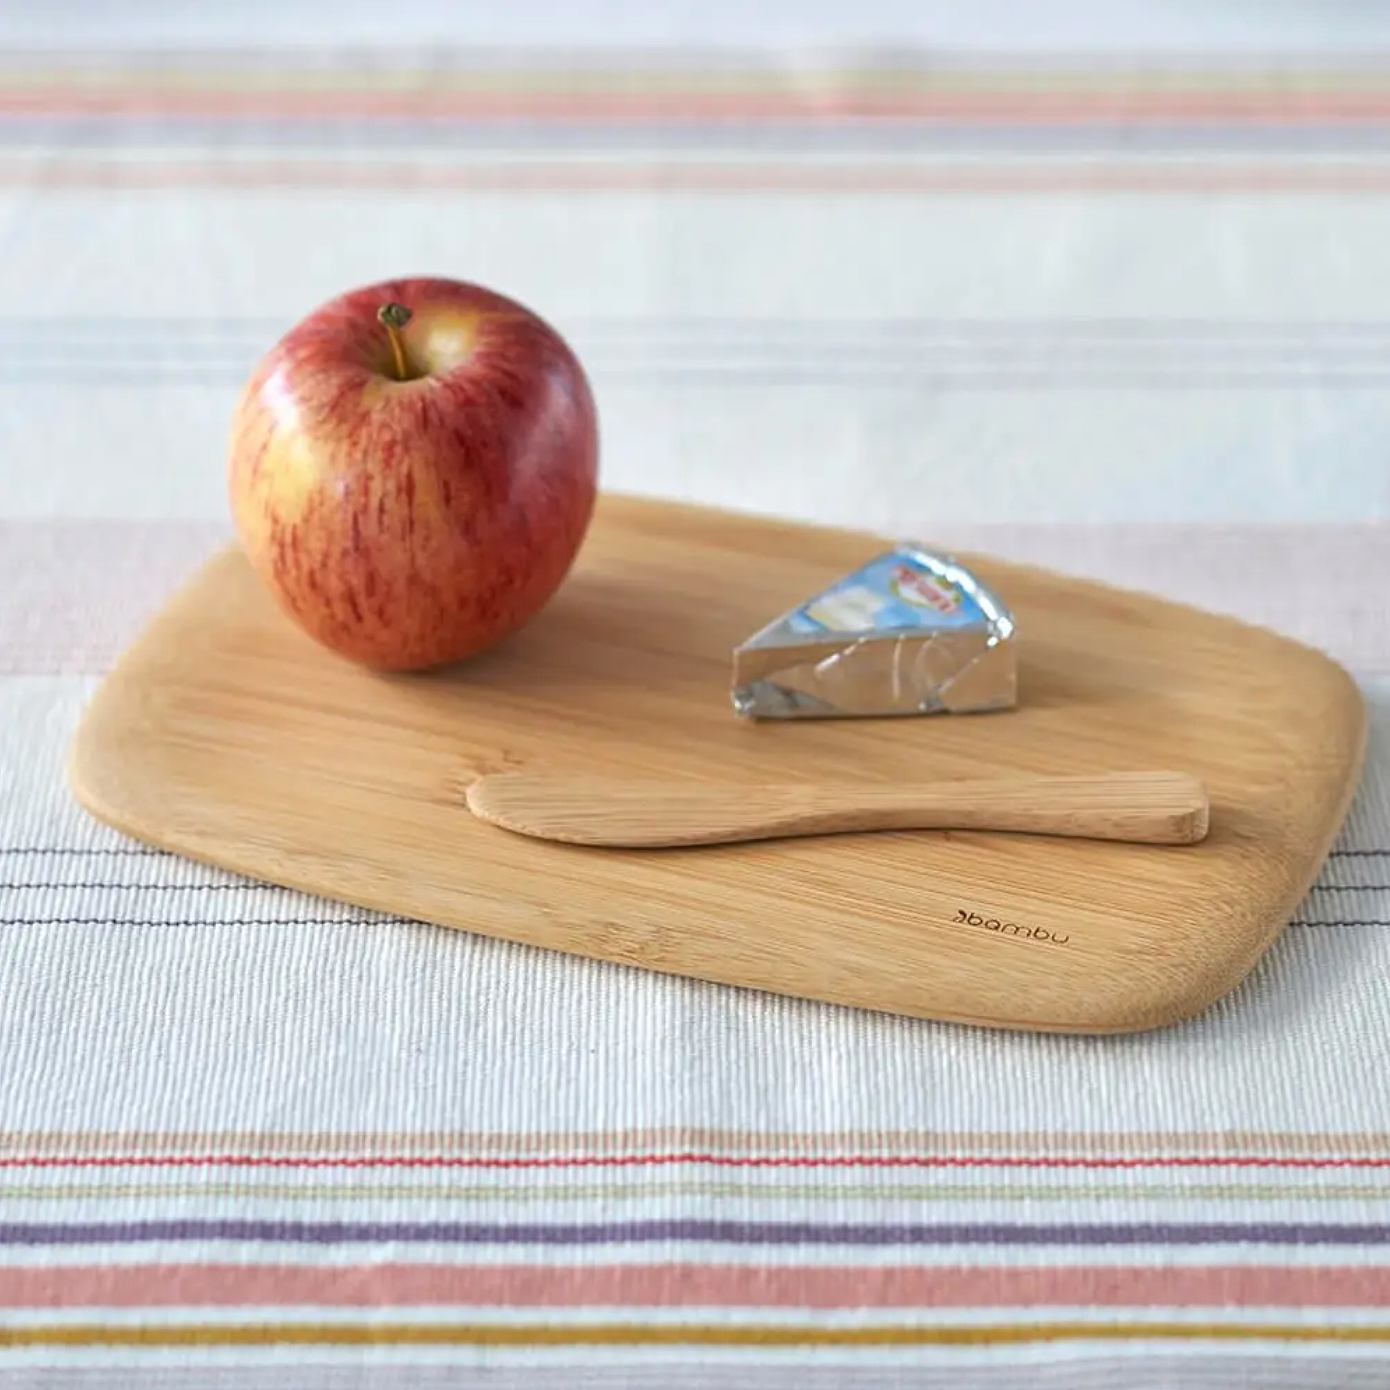 Classic Bamboo Cutting & Serving Board - Small